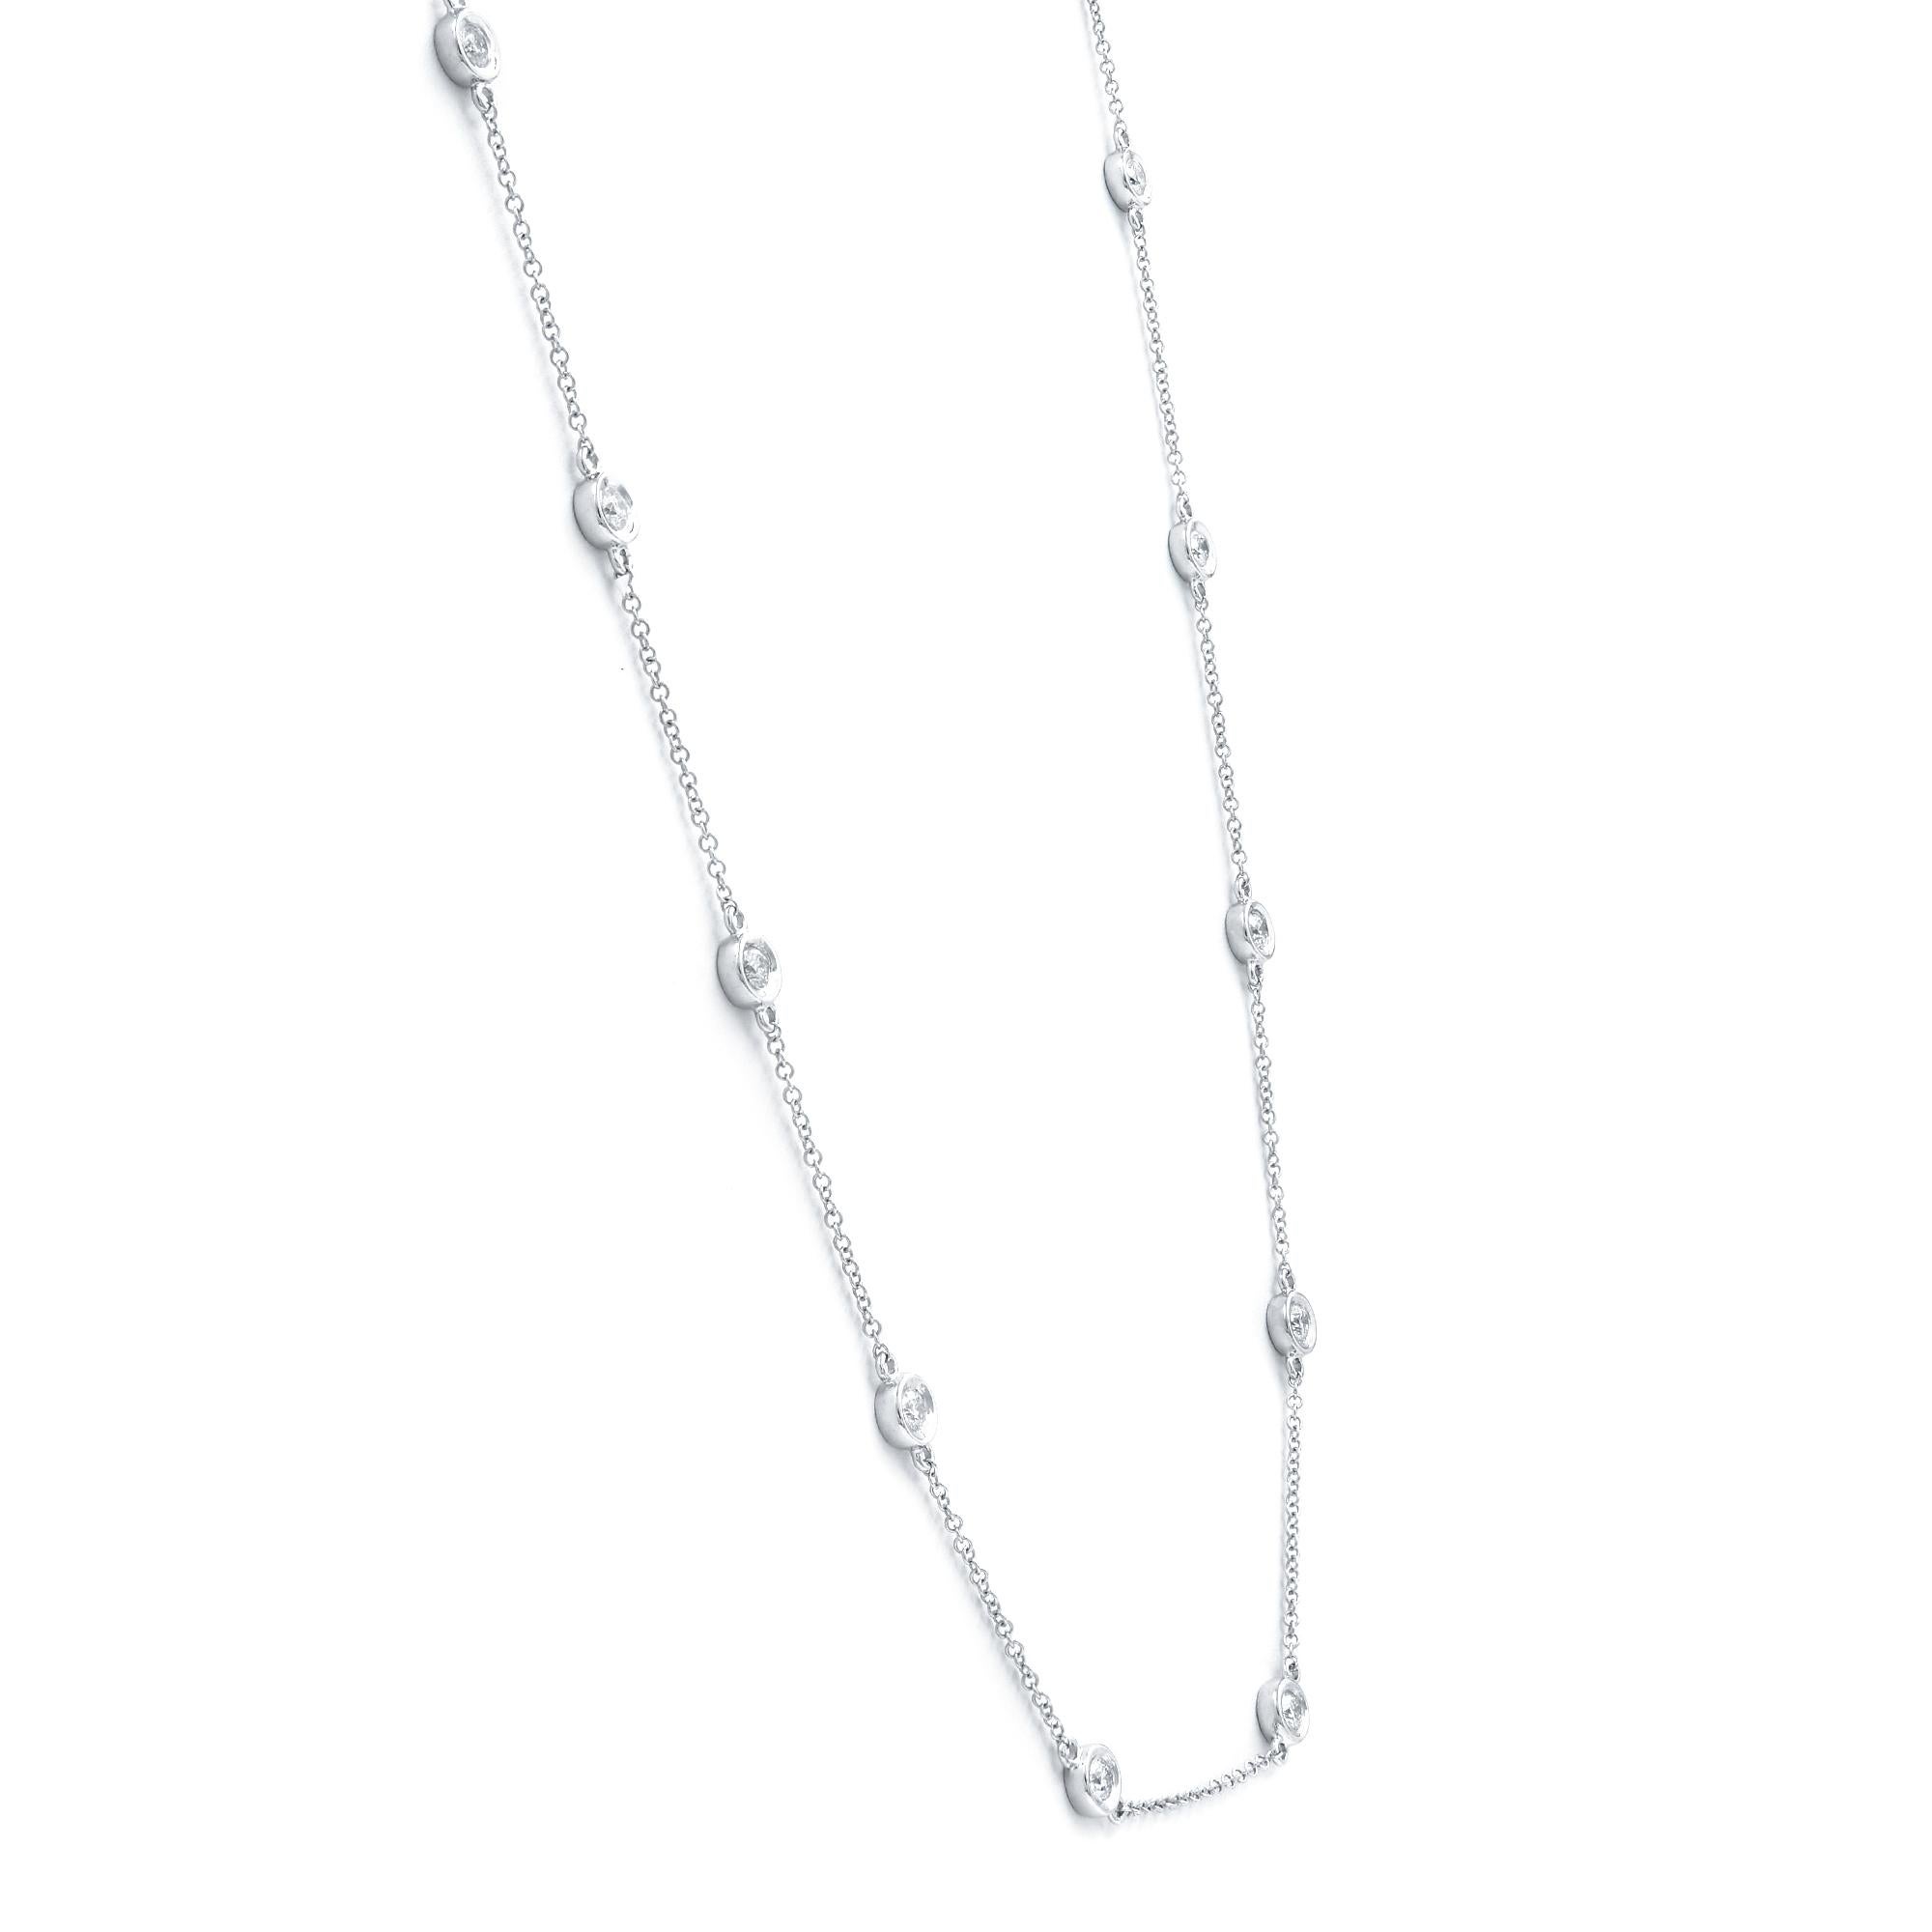 Round Cut 14 Karat White Gold Diamonds 0.77 Carat by the Yard Chain Necklace For Sale